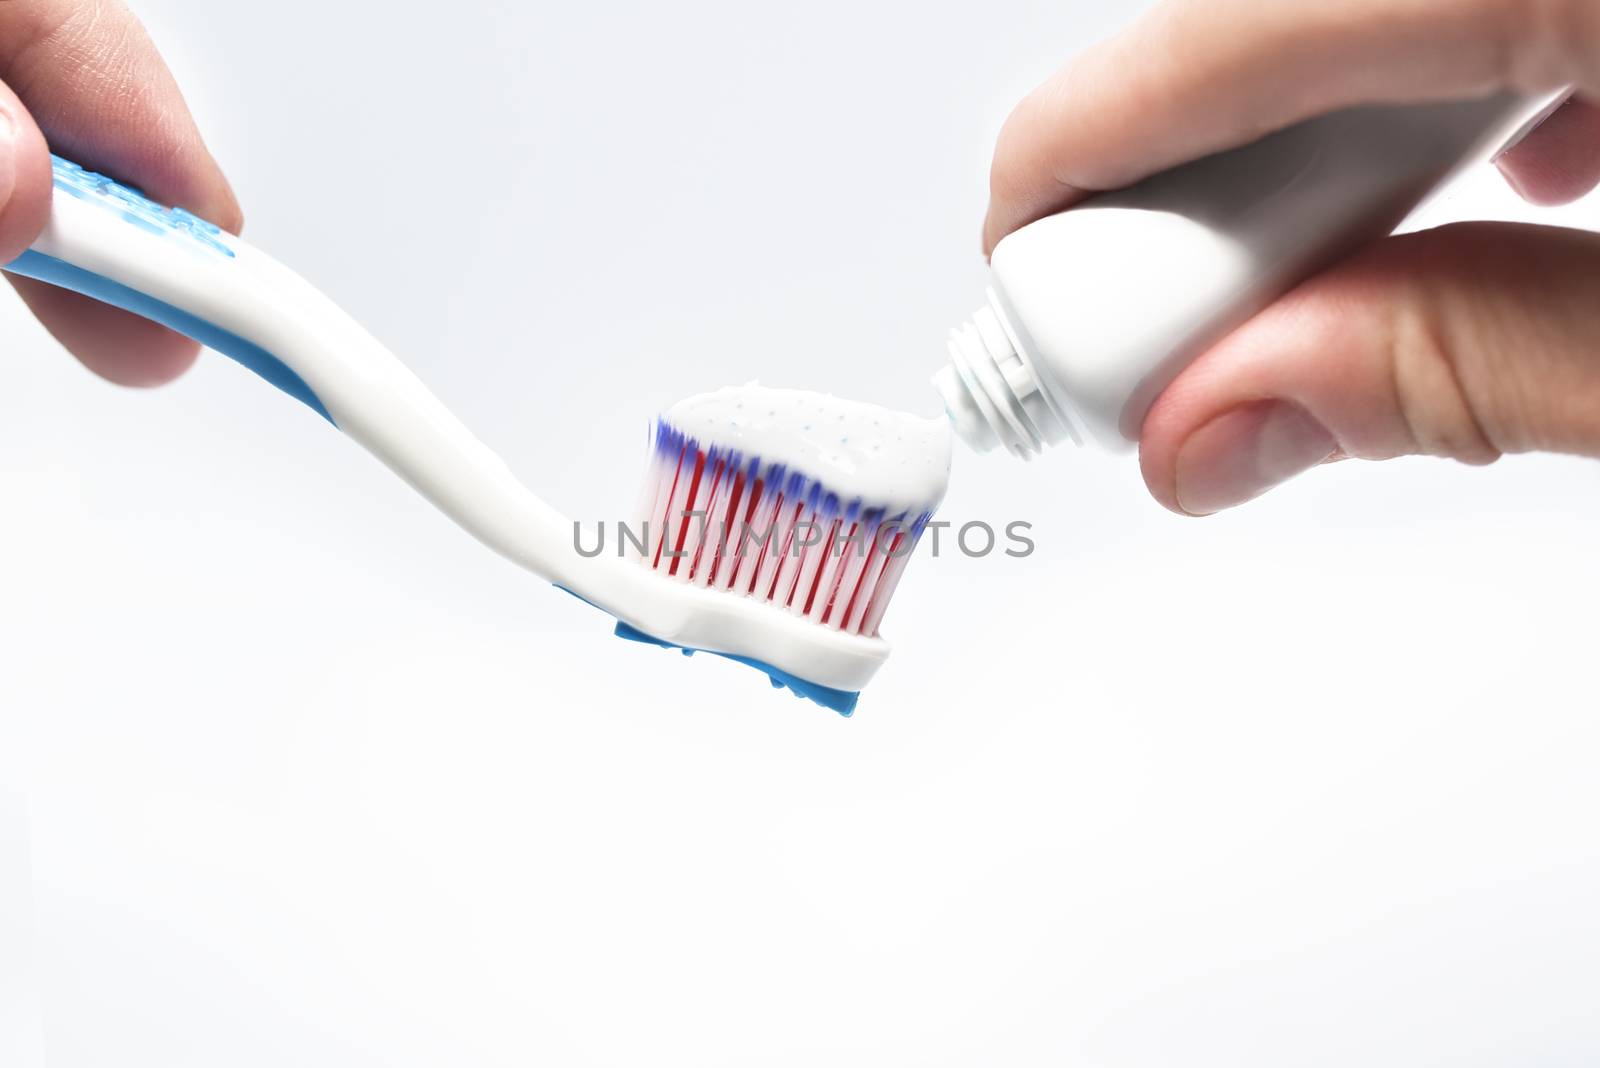 Fresh toothpaste and toothbrush in the male hands, isolated on white background